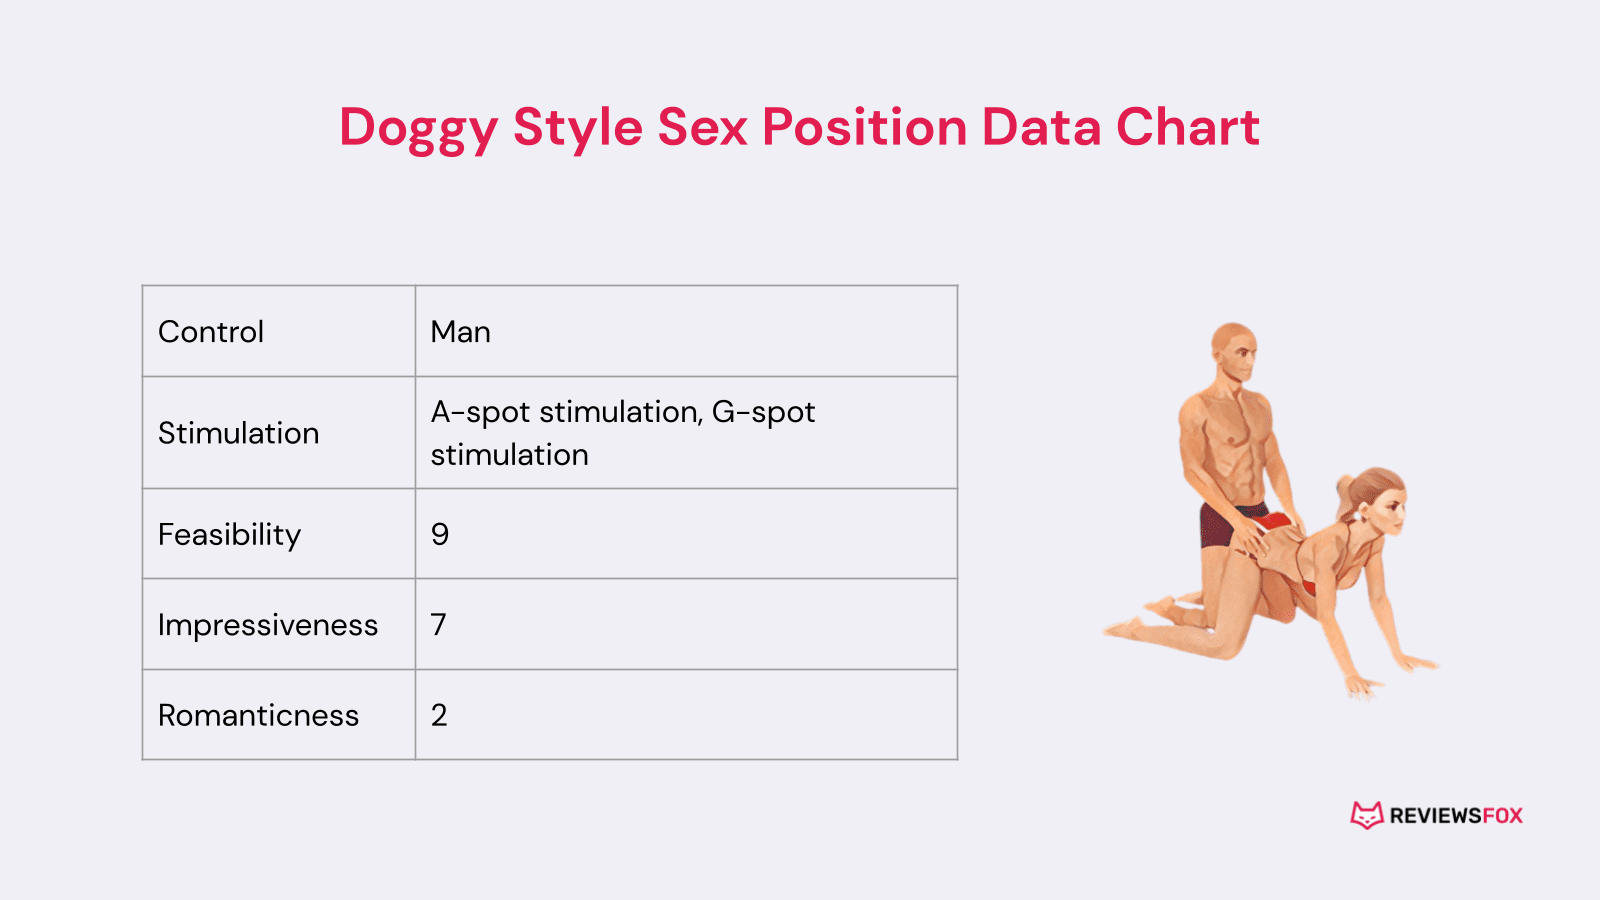 Doggy Style sex position data chart